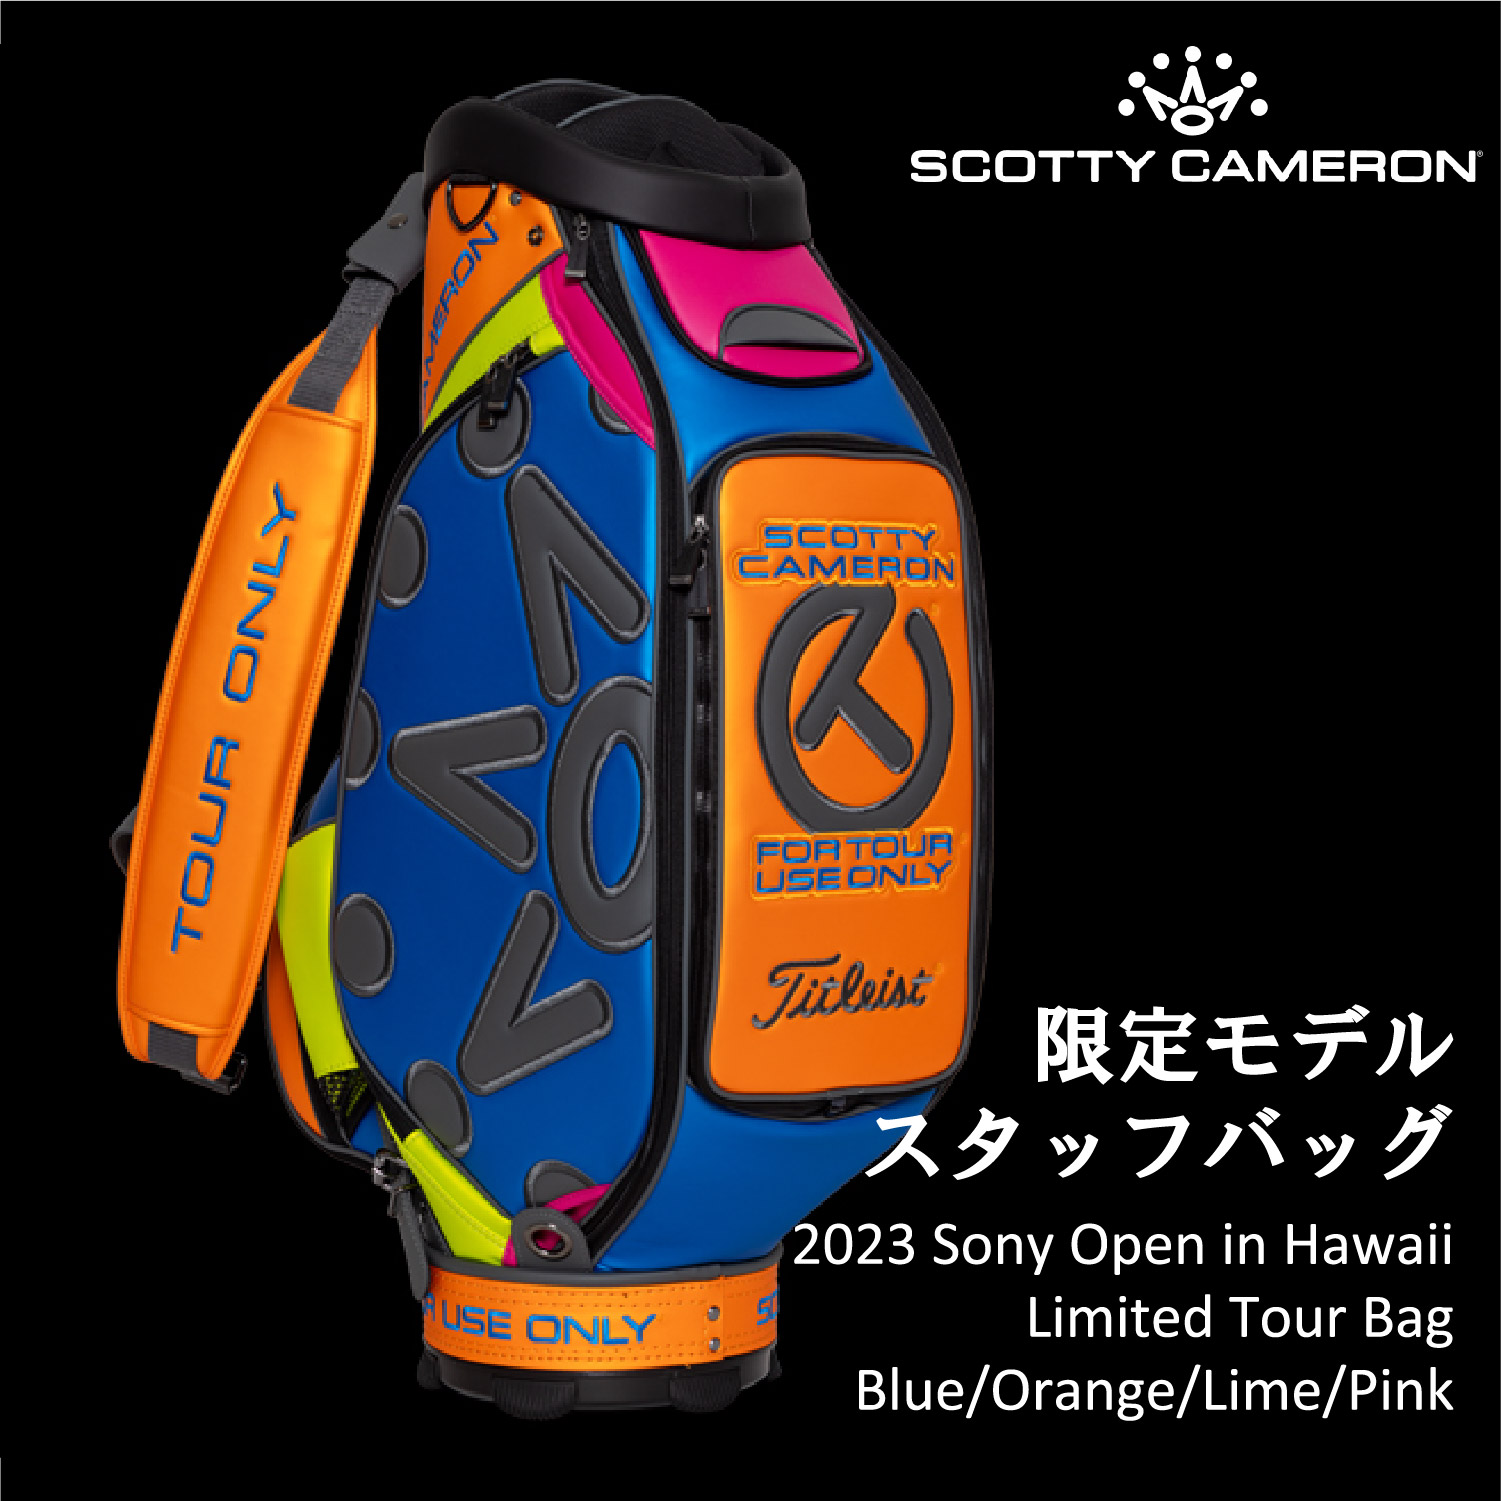 Scotty Cameron 限定キャディバッグ 2023 TOUR BAG Sony Open in Hawaii Blue/Orange/Lime/Pink